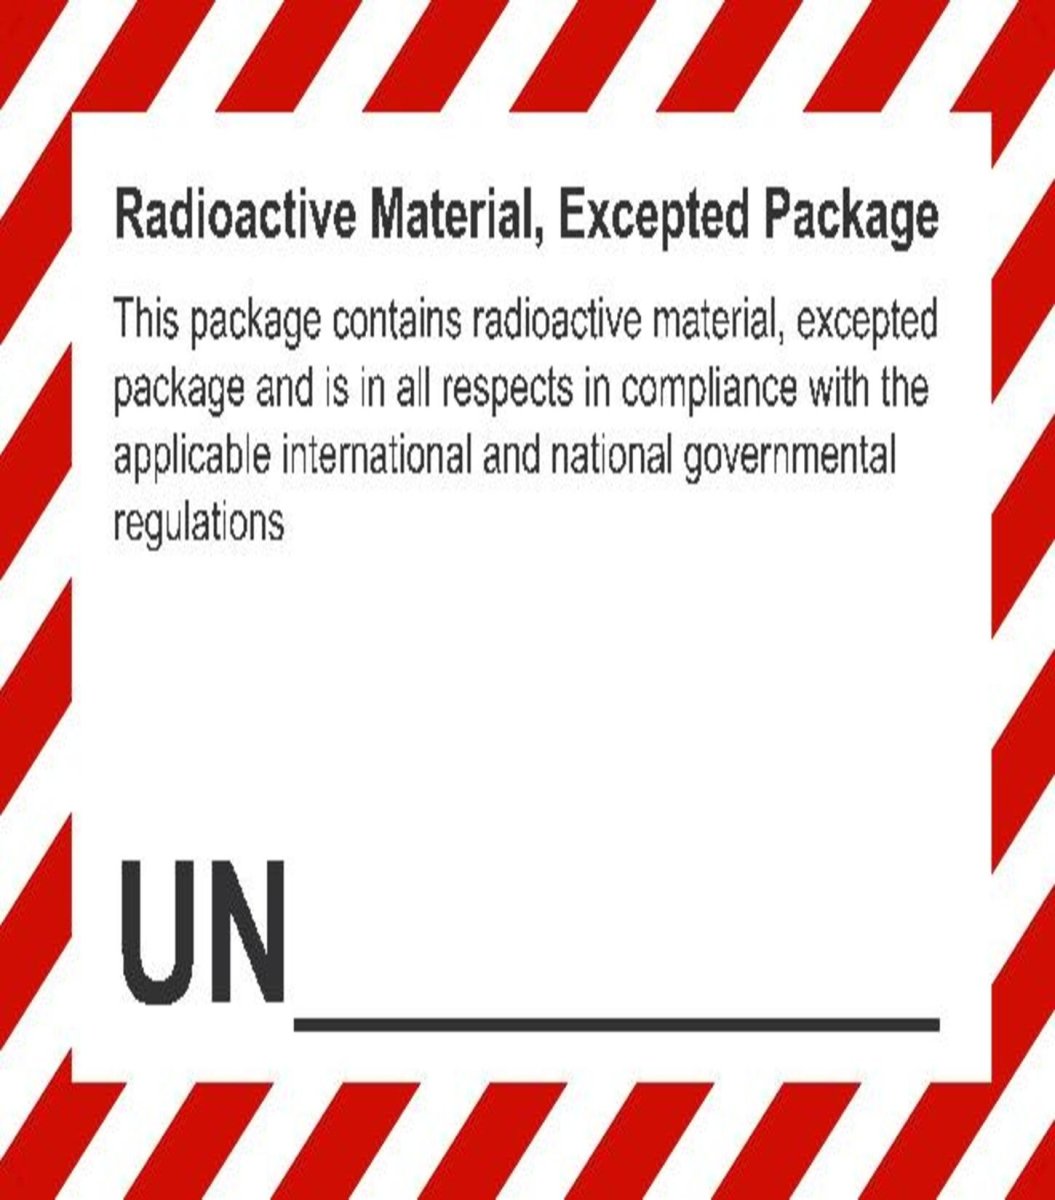 Radioactive Material, Excepted Package - SGS Netherlands